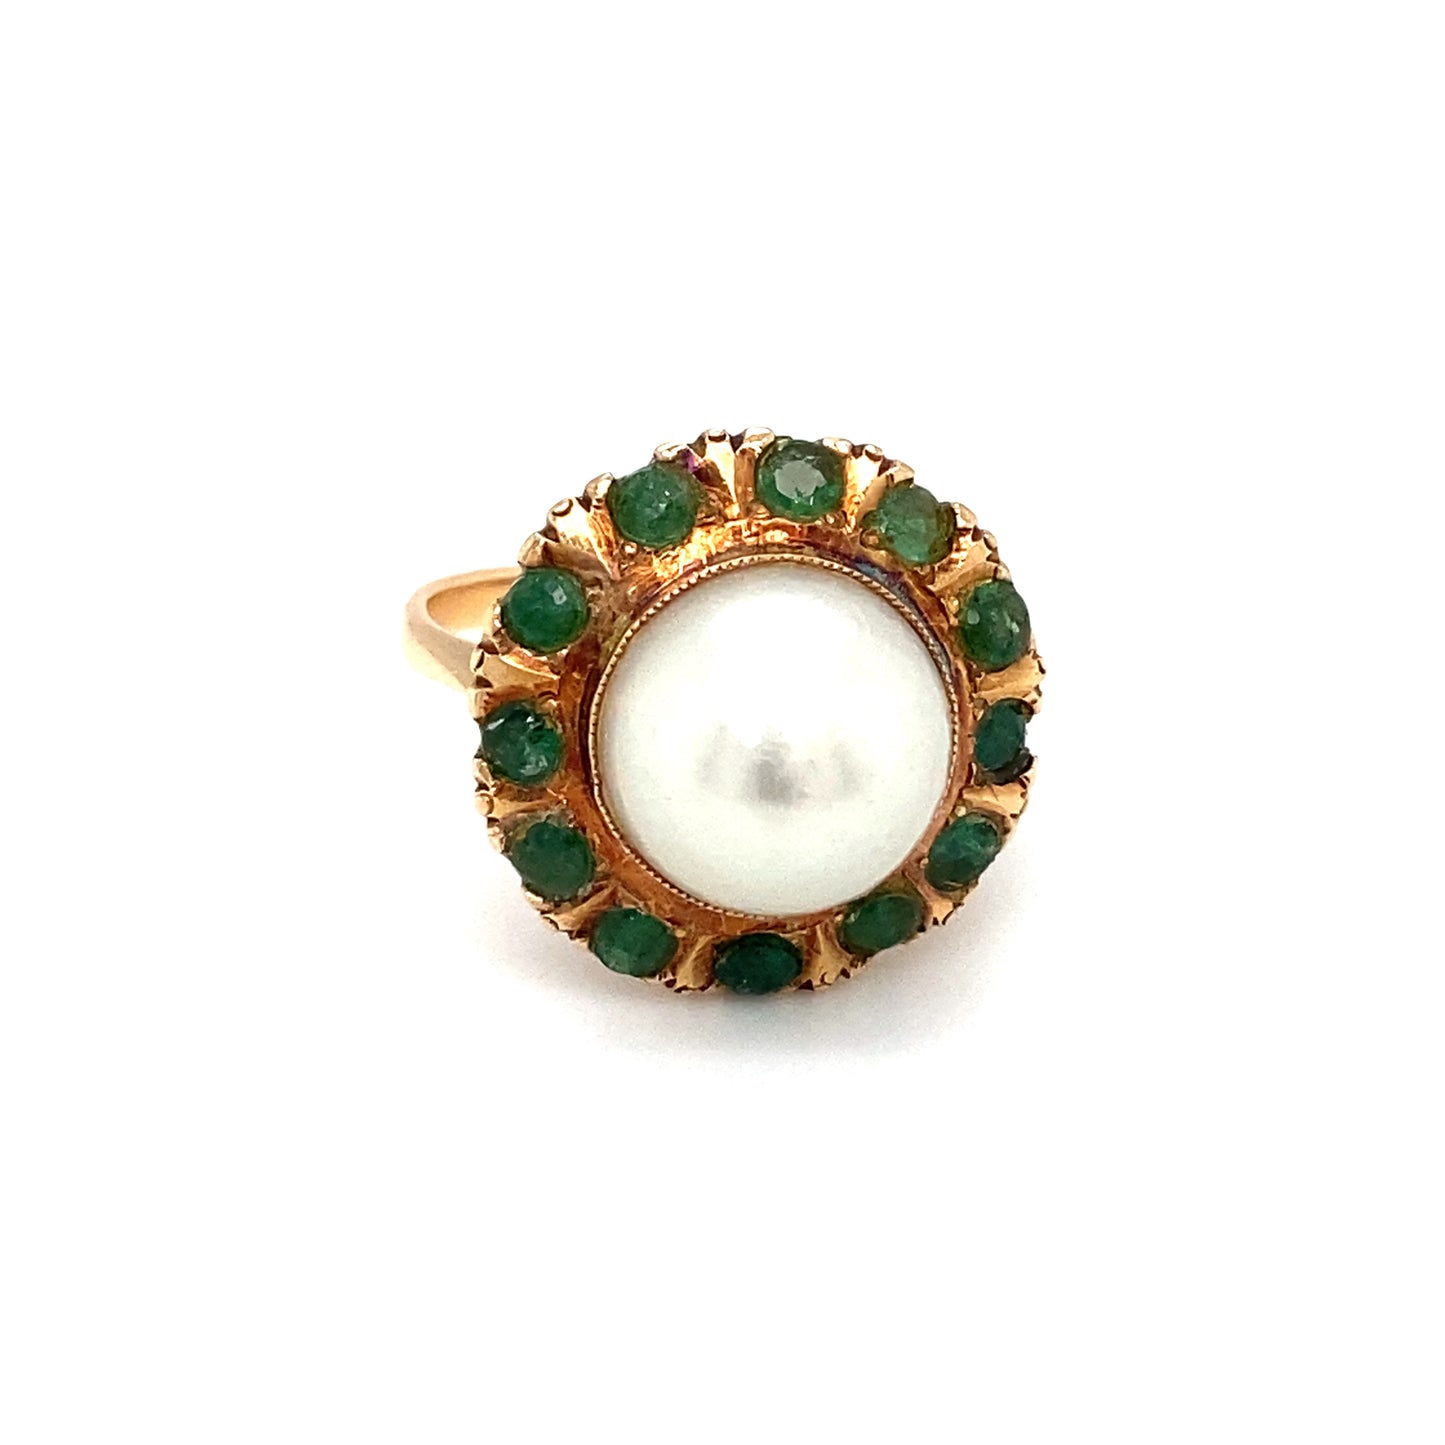 Circa 1890s Victorian Pearl and Emerald Cocktail Ring in 18K Gold